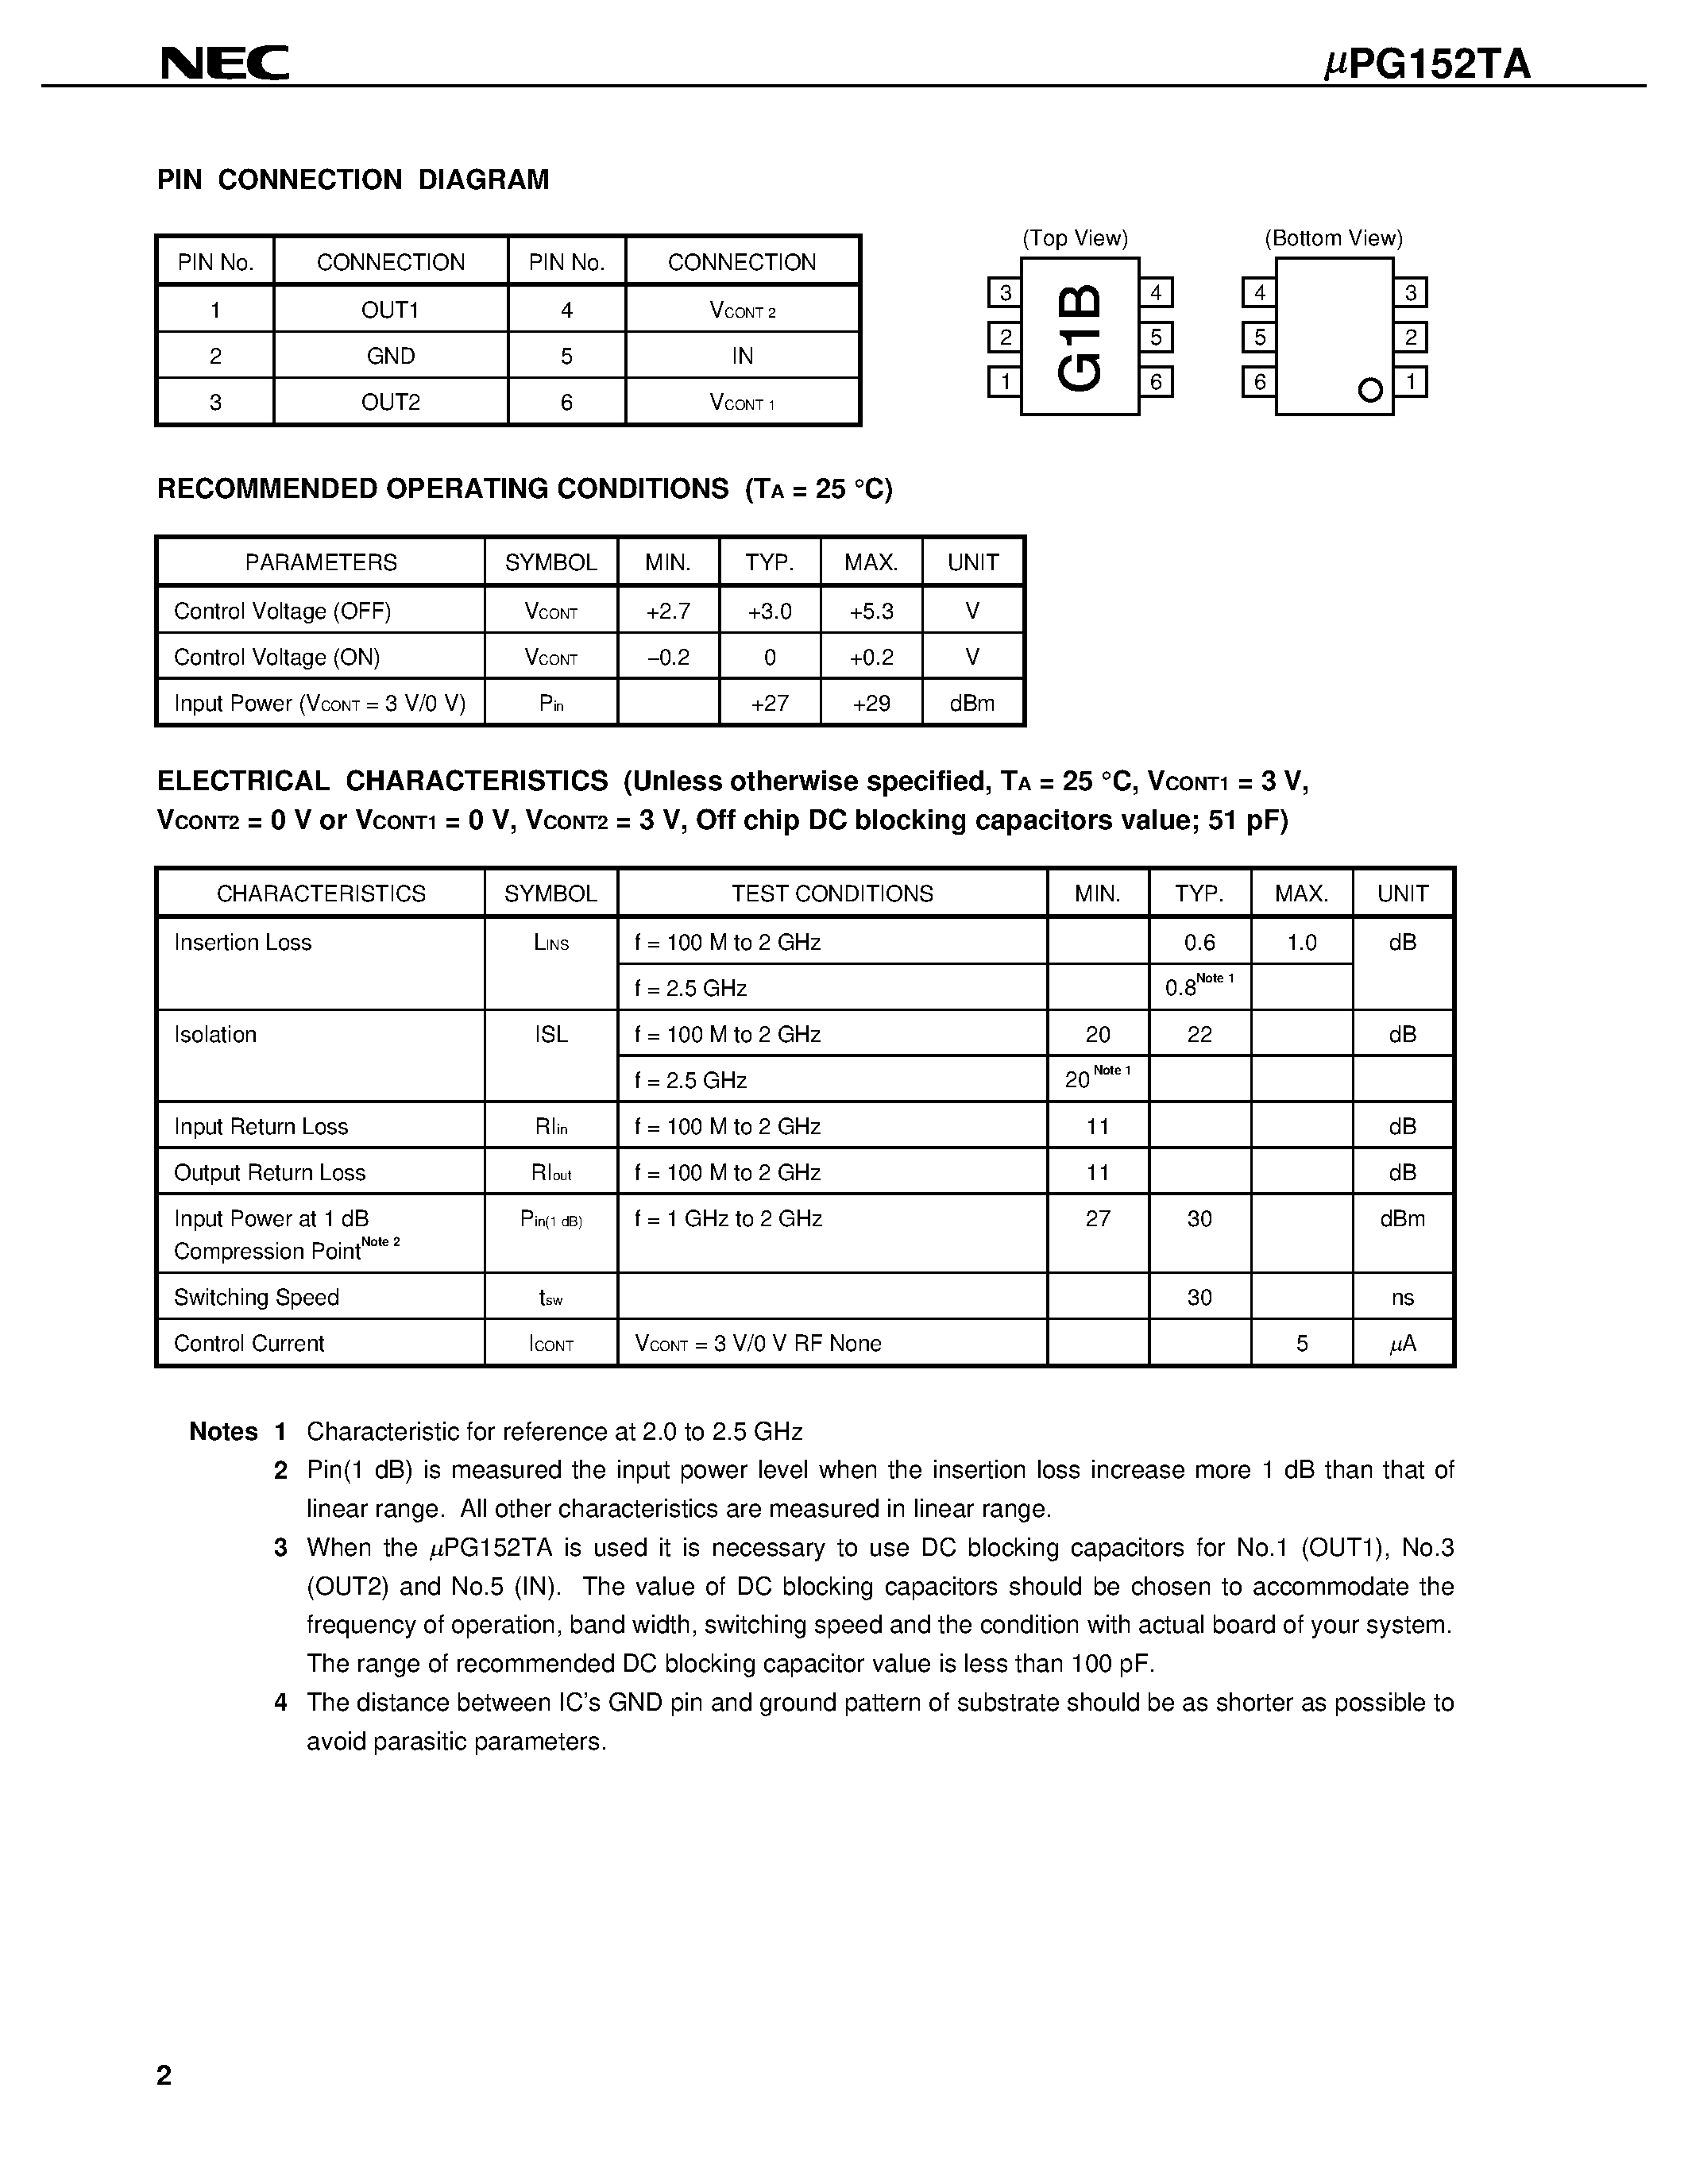 Datasheet UPG152TA-E3 - L-BAND SPDT SWITCH page 2